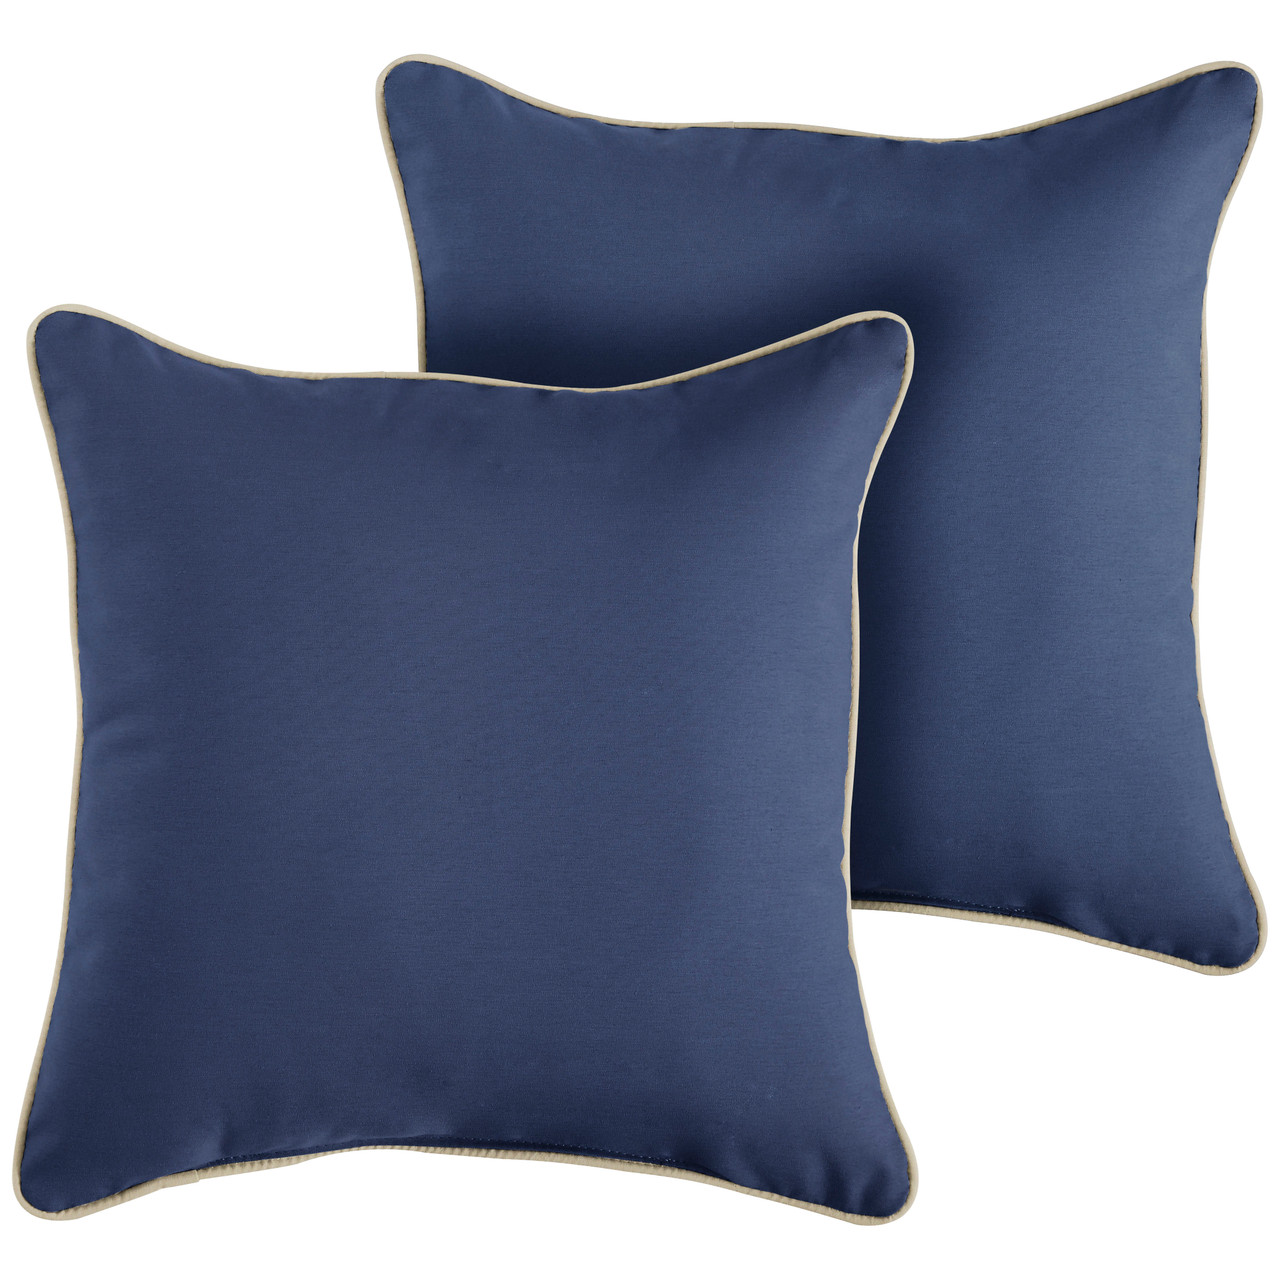 Set of 2 Blue & Ivory Corded Indoor & Outdoor Square Pillows, 18-Inch